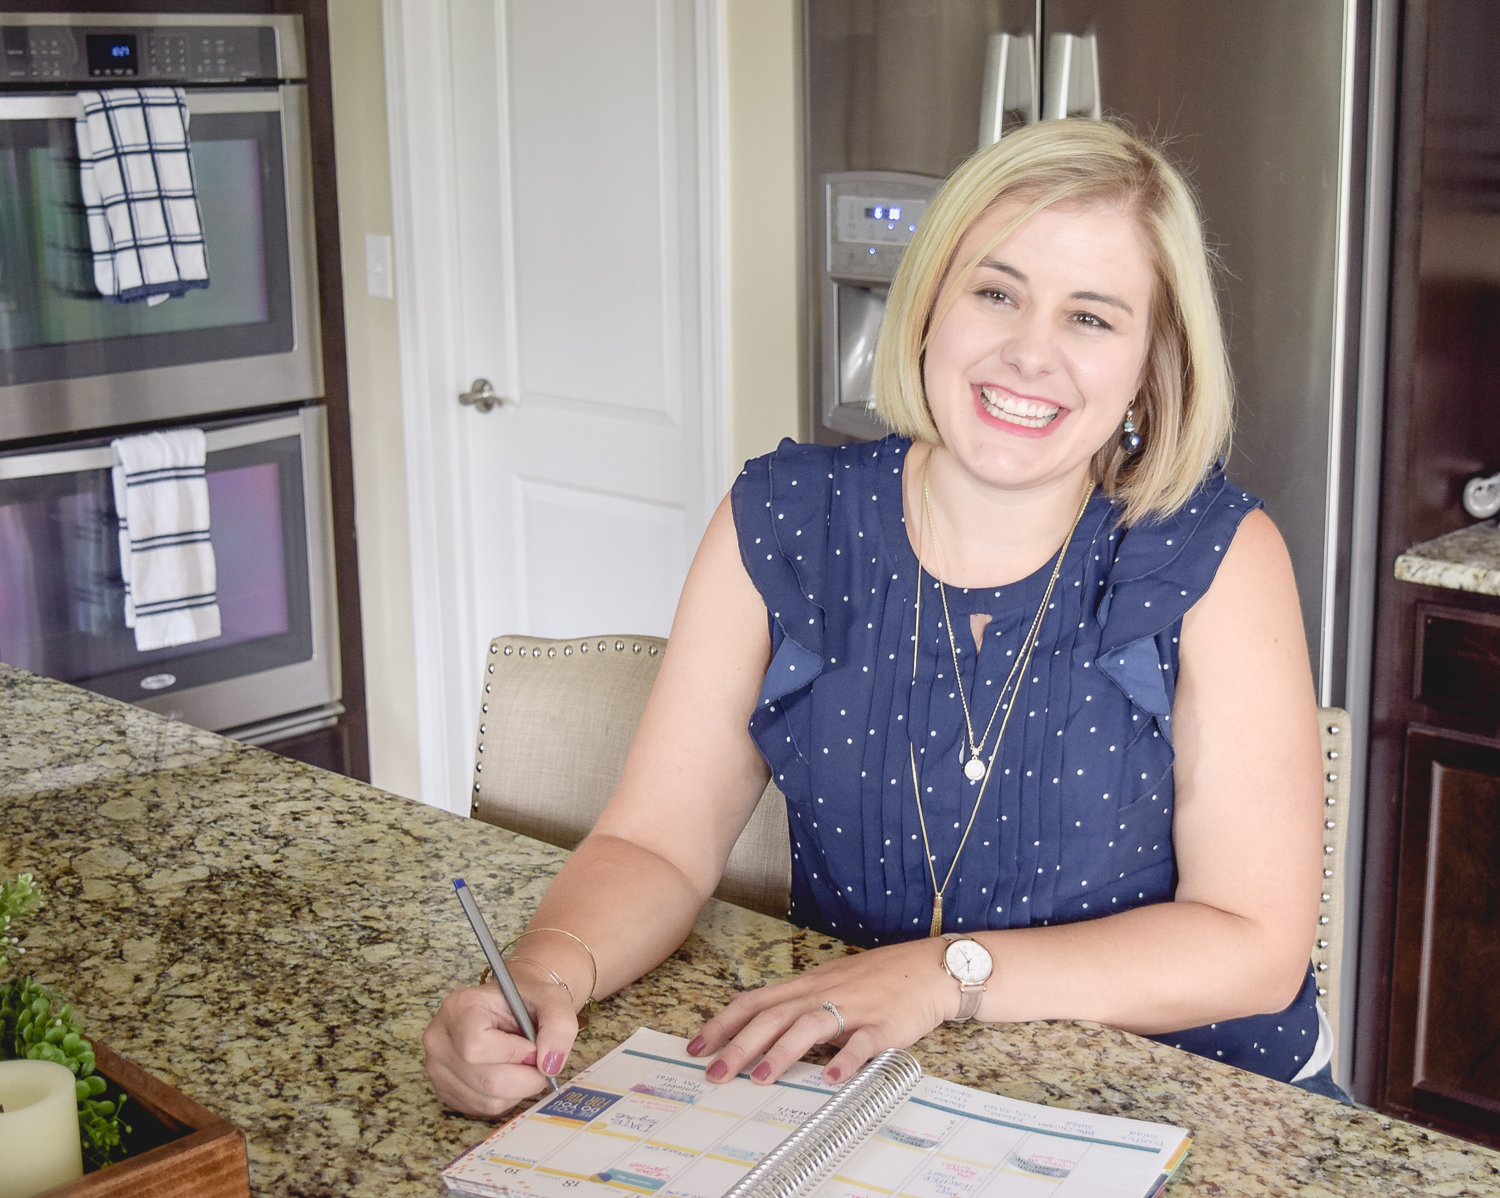 Learn how to use a planner effectively with these tips from planner pros like Brittany!